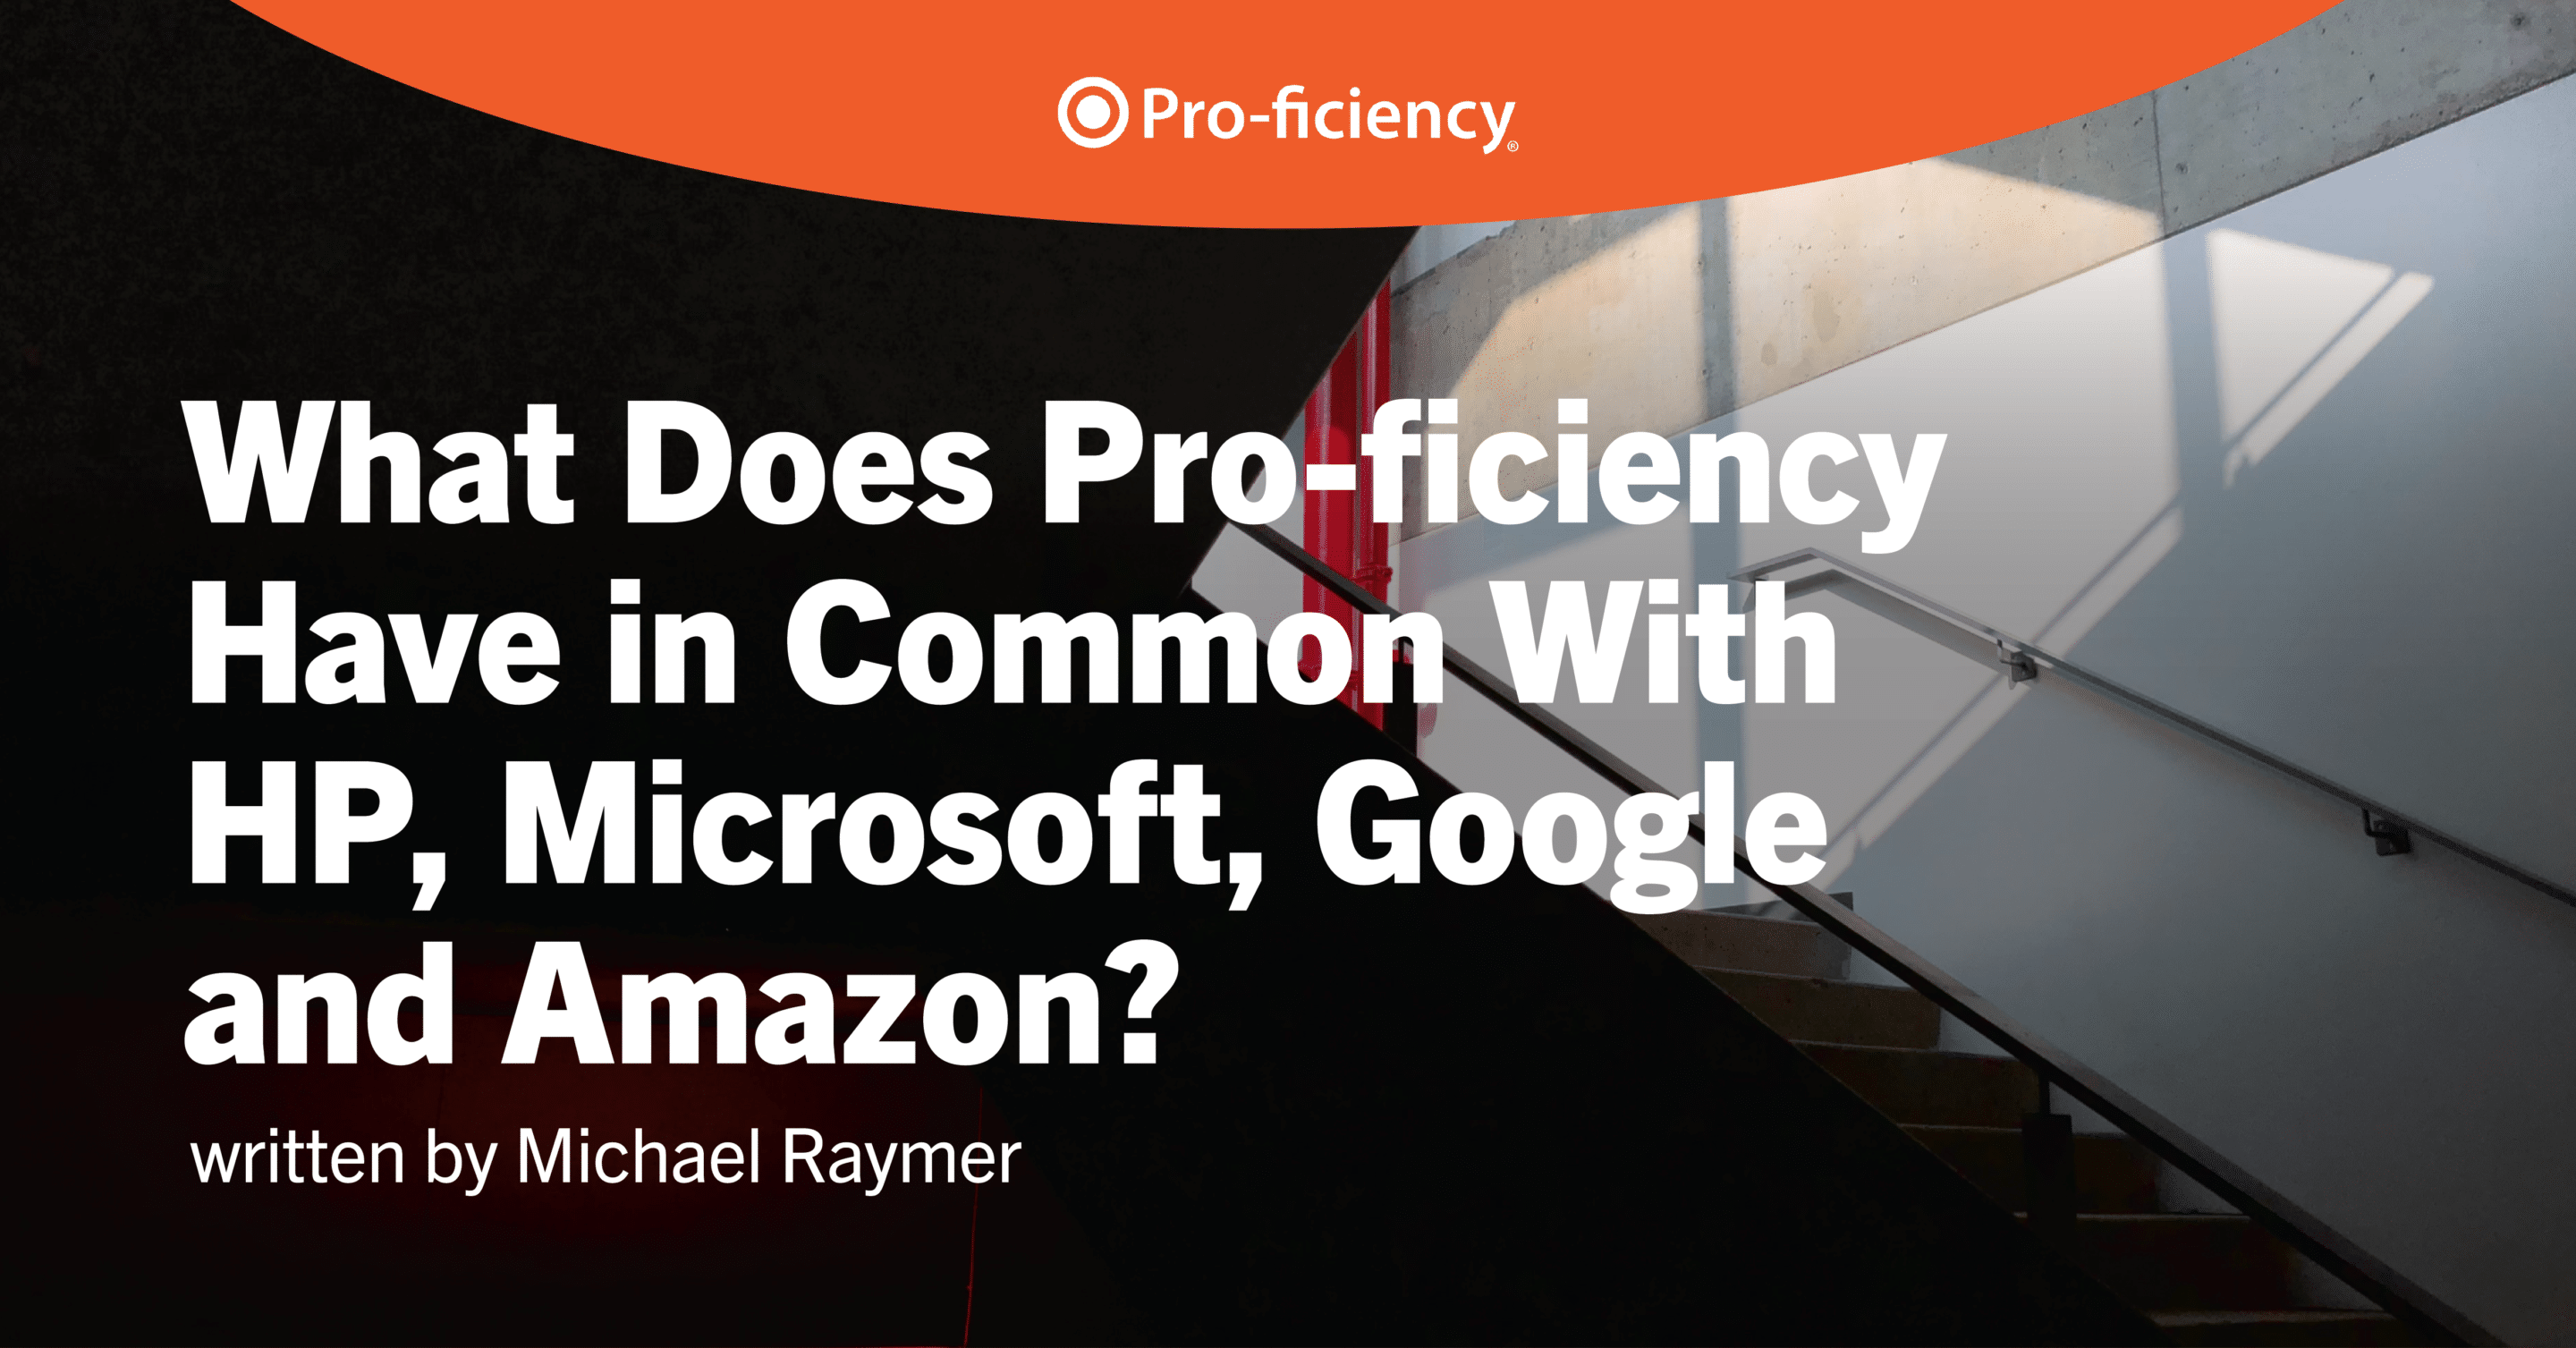 What Does Pro-ficiency Have in Common With HP, Microsoft, Google and Amazon?